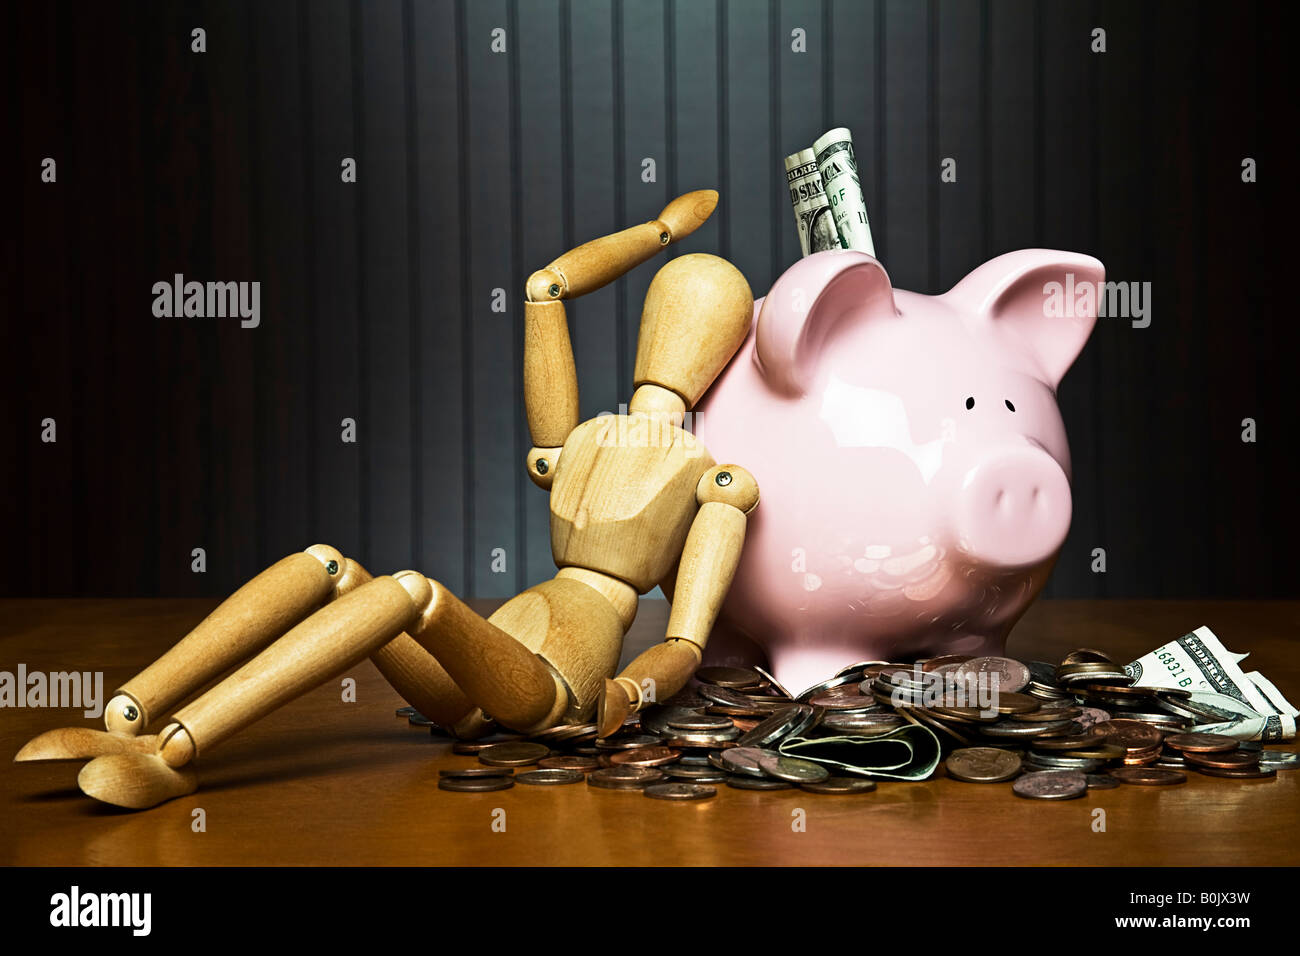 Manikin leaning against a piggy bank surrounded by money Stock Photo